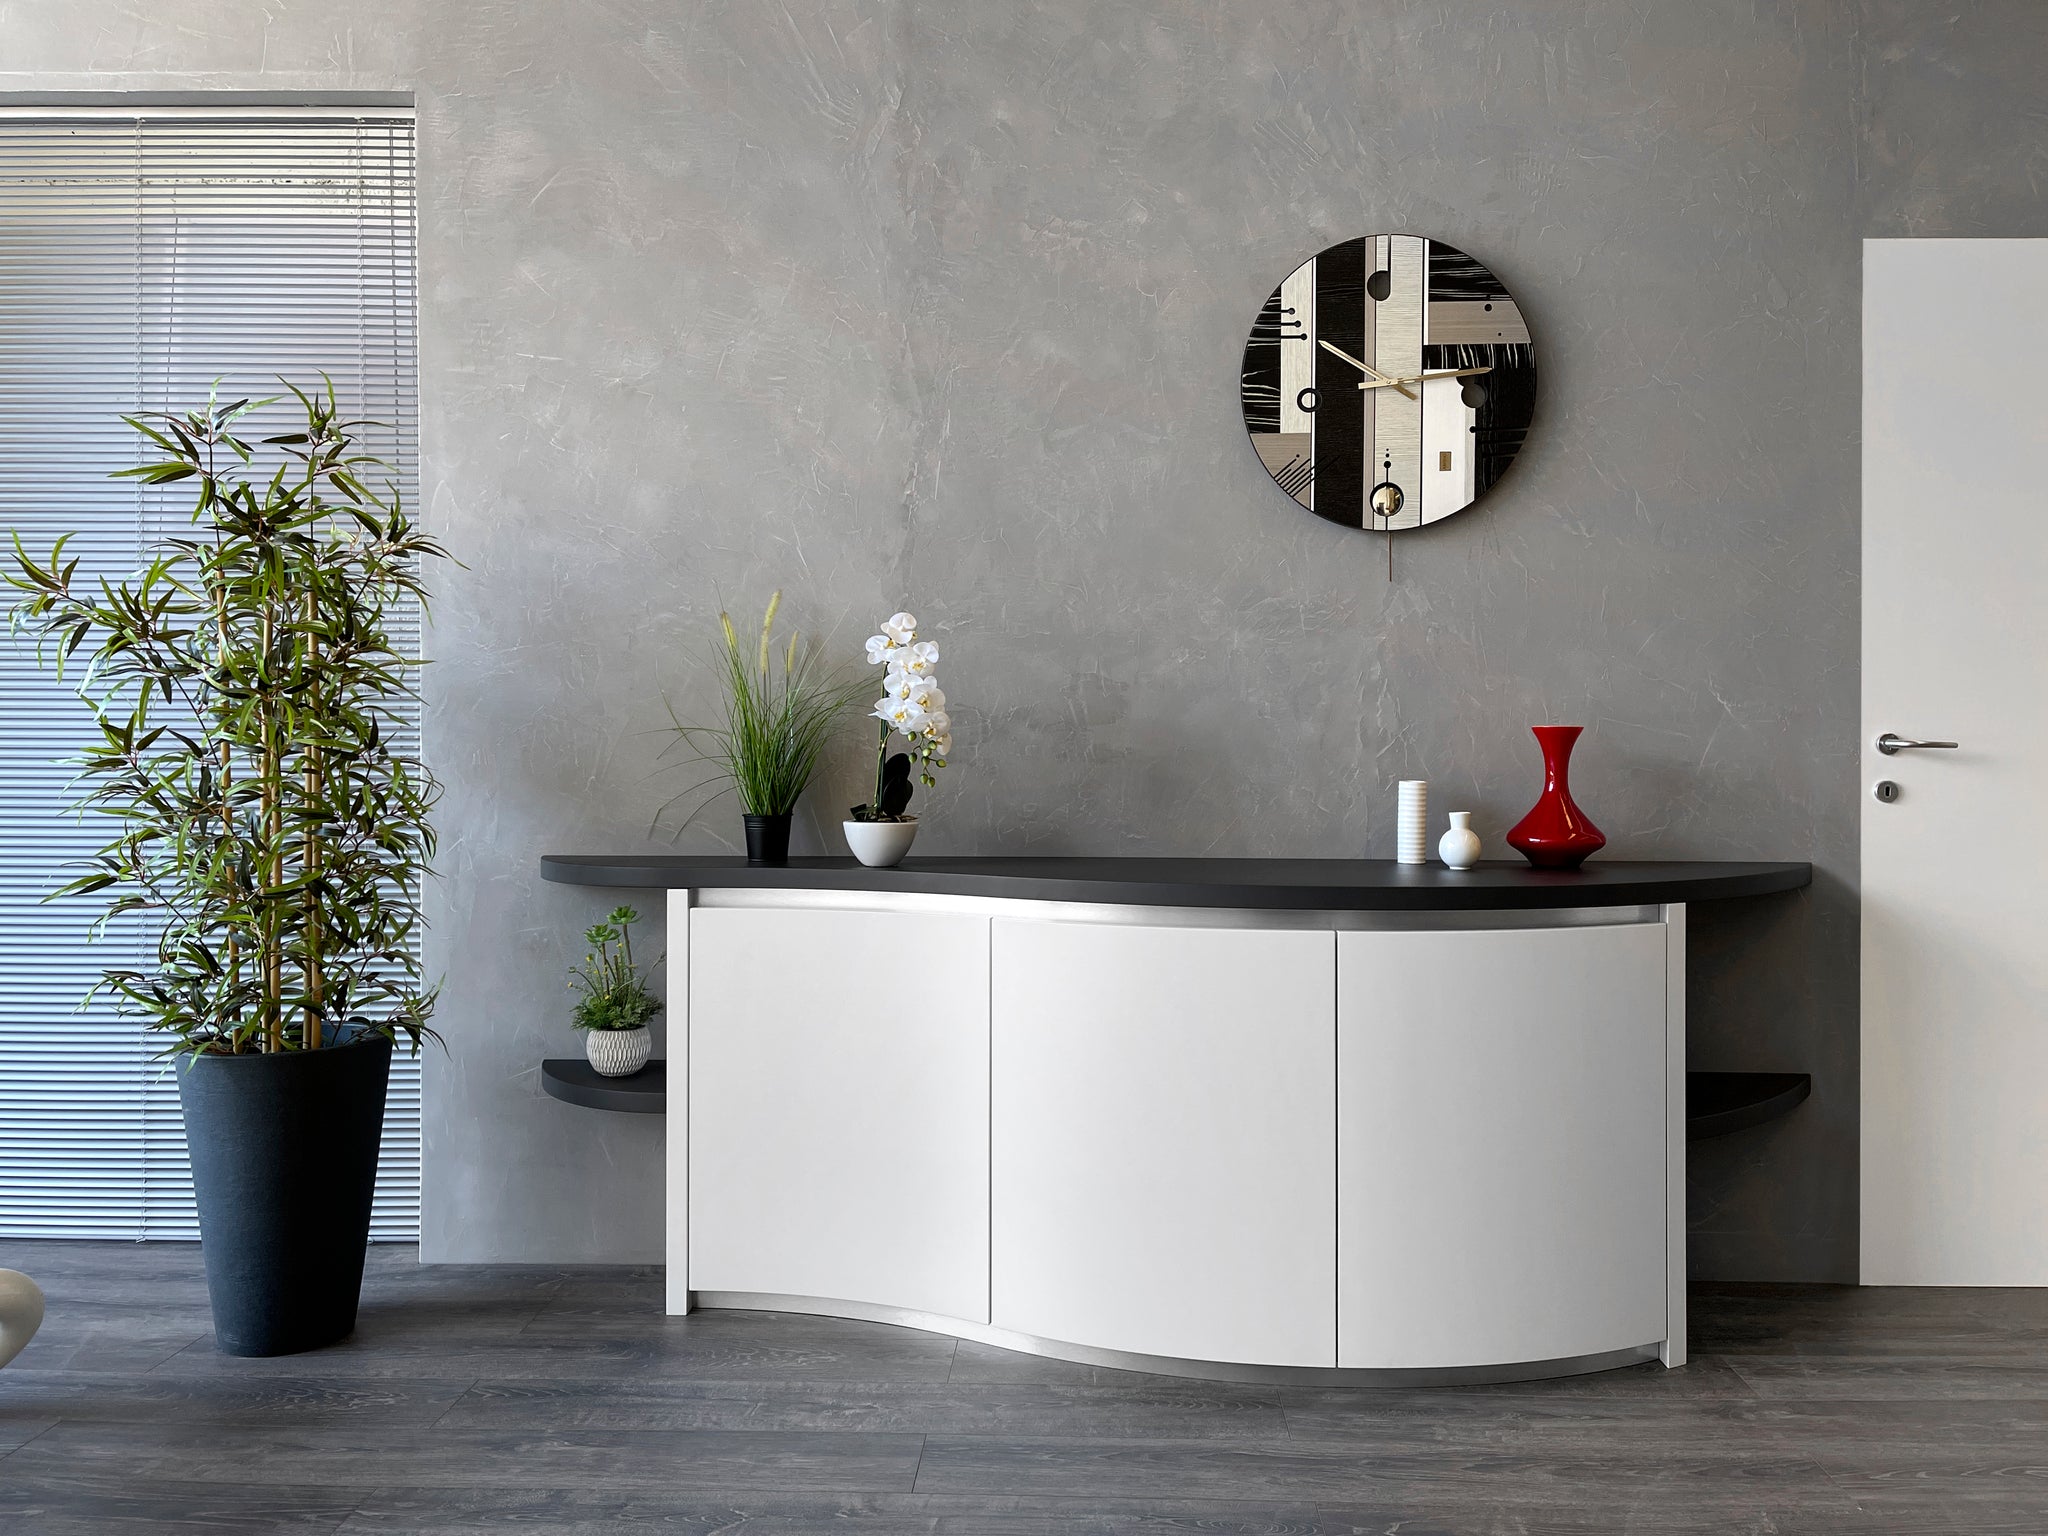 Curved Furniture - Curved modern cupboard - Black and white sideboard 